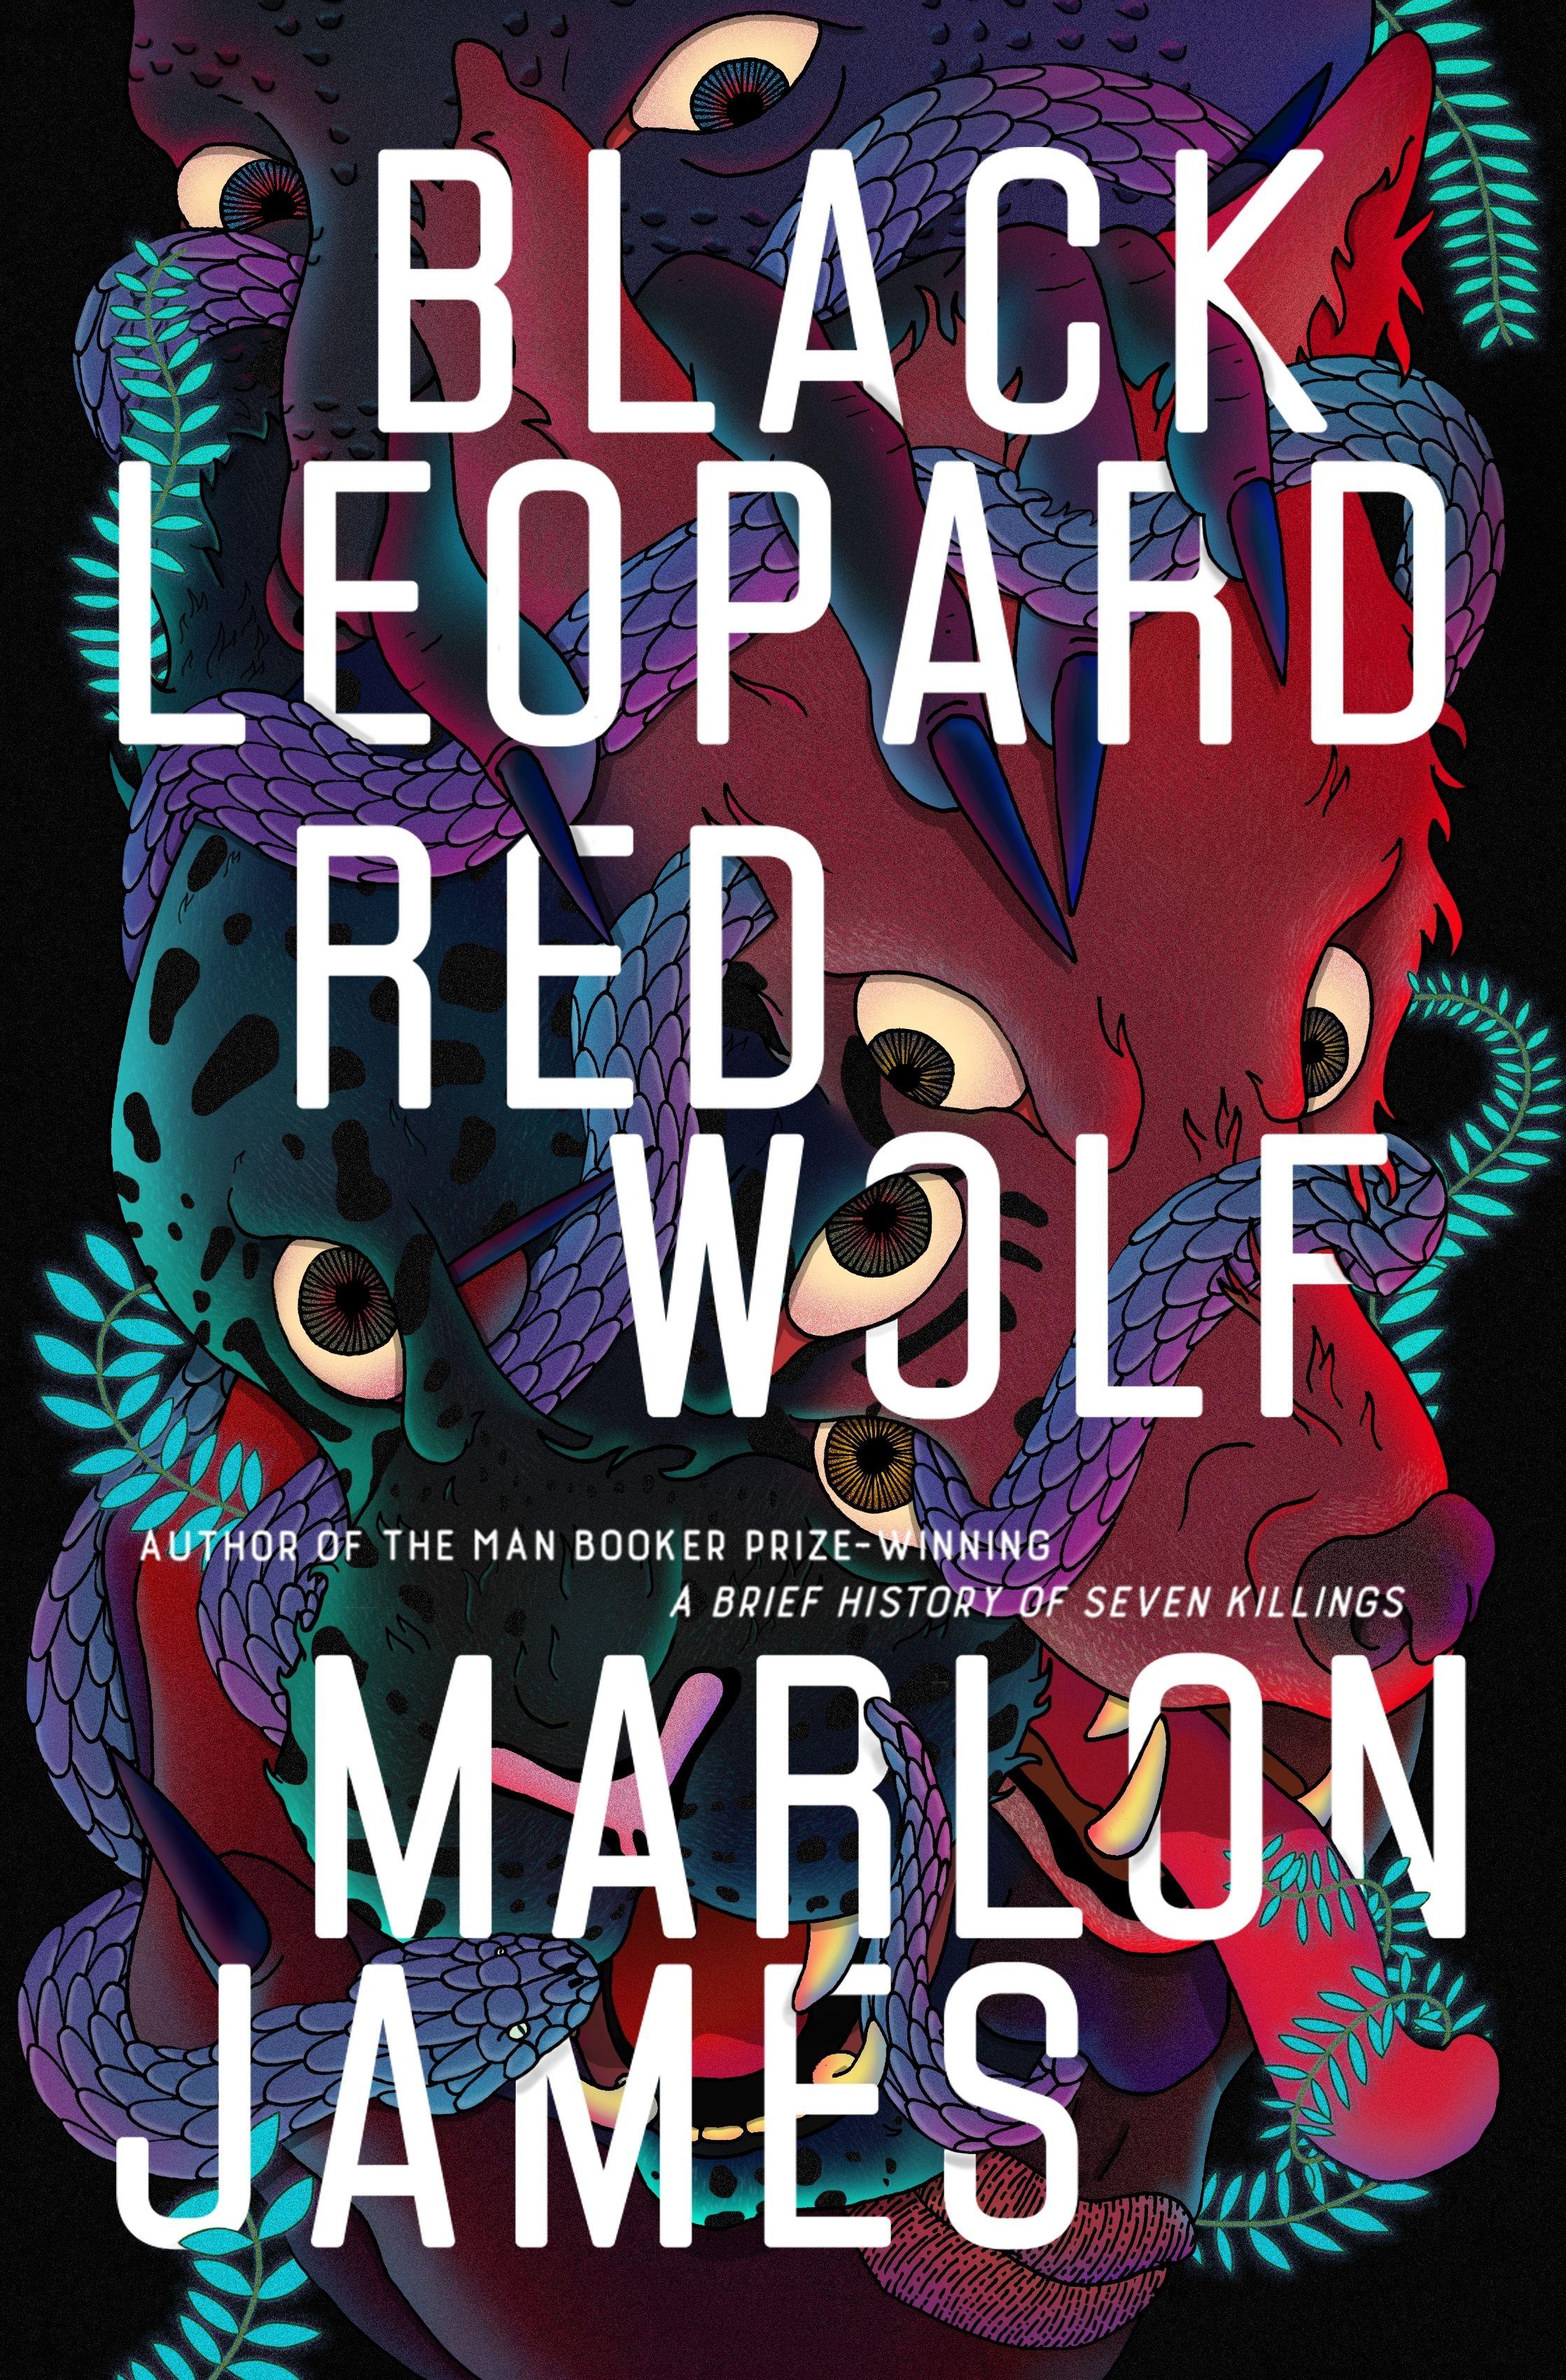 Black and Red Wolf Logo - Black Leopard, Red Wolf by Marlon James Books Australia